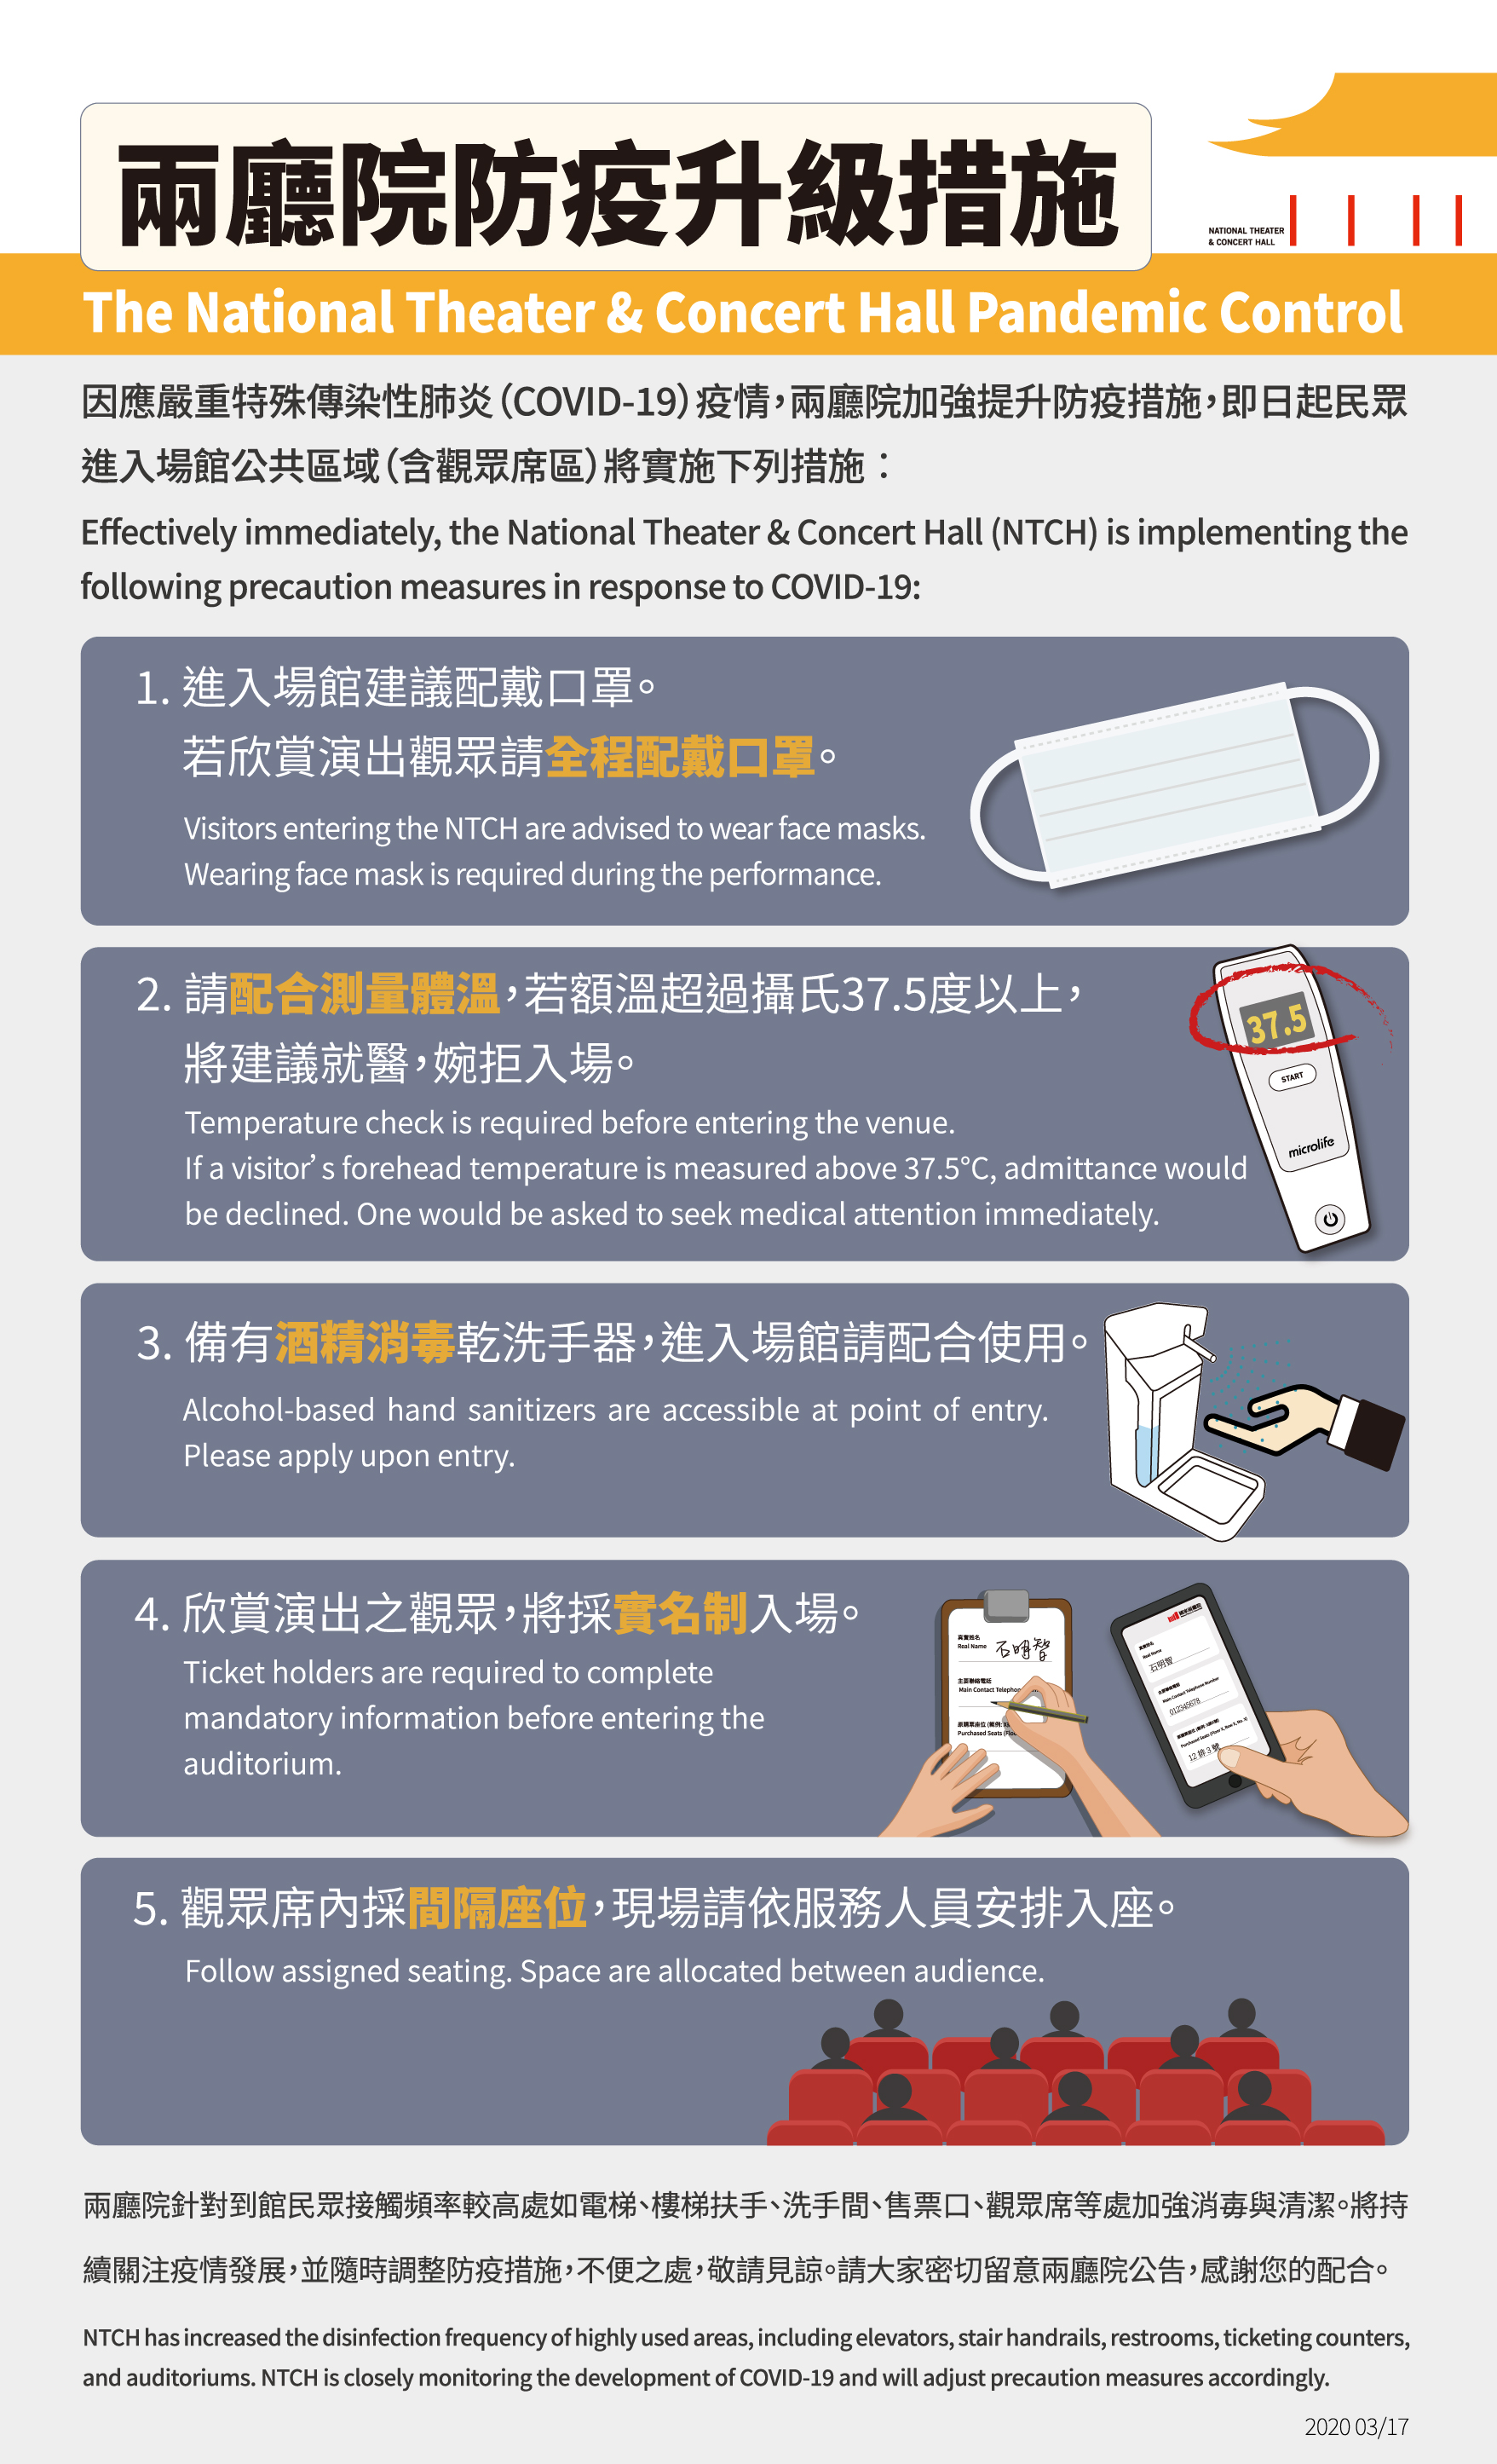 COVID-19 prevention guide for performances, exhibitions in Taiwan